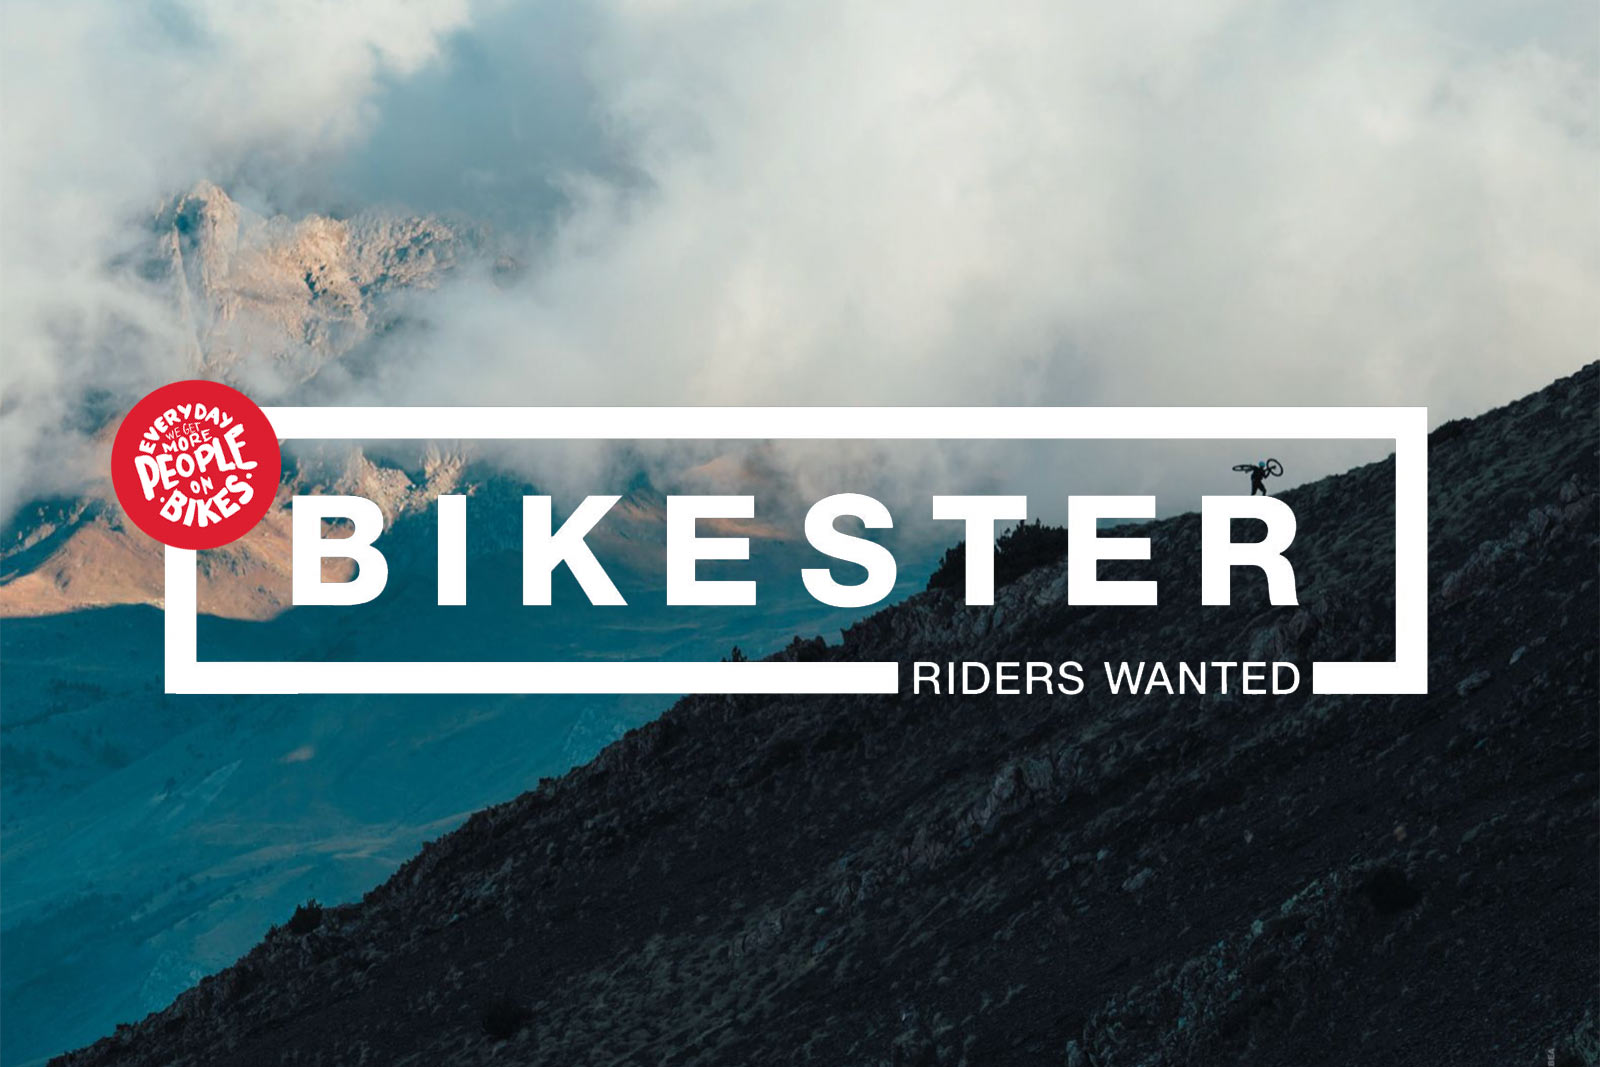 Profile Online retailer Bikester explains house brands, internet stores and supply chain issues